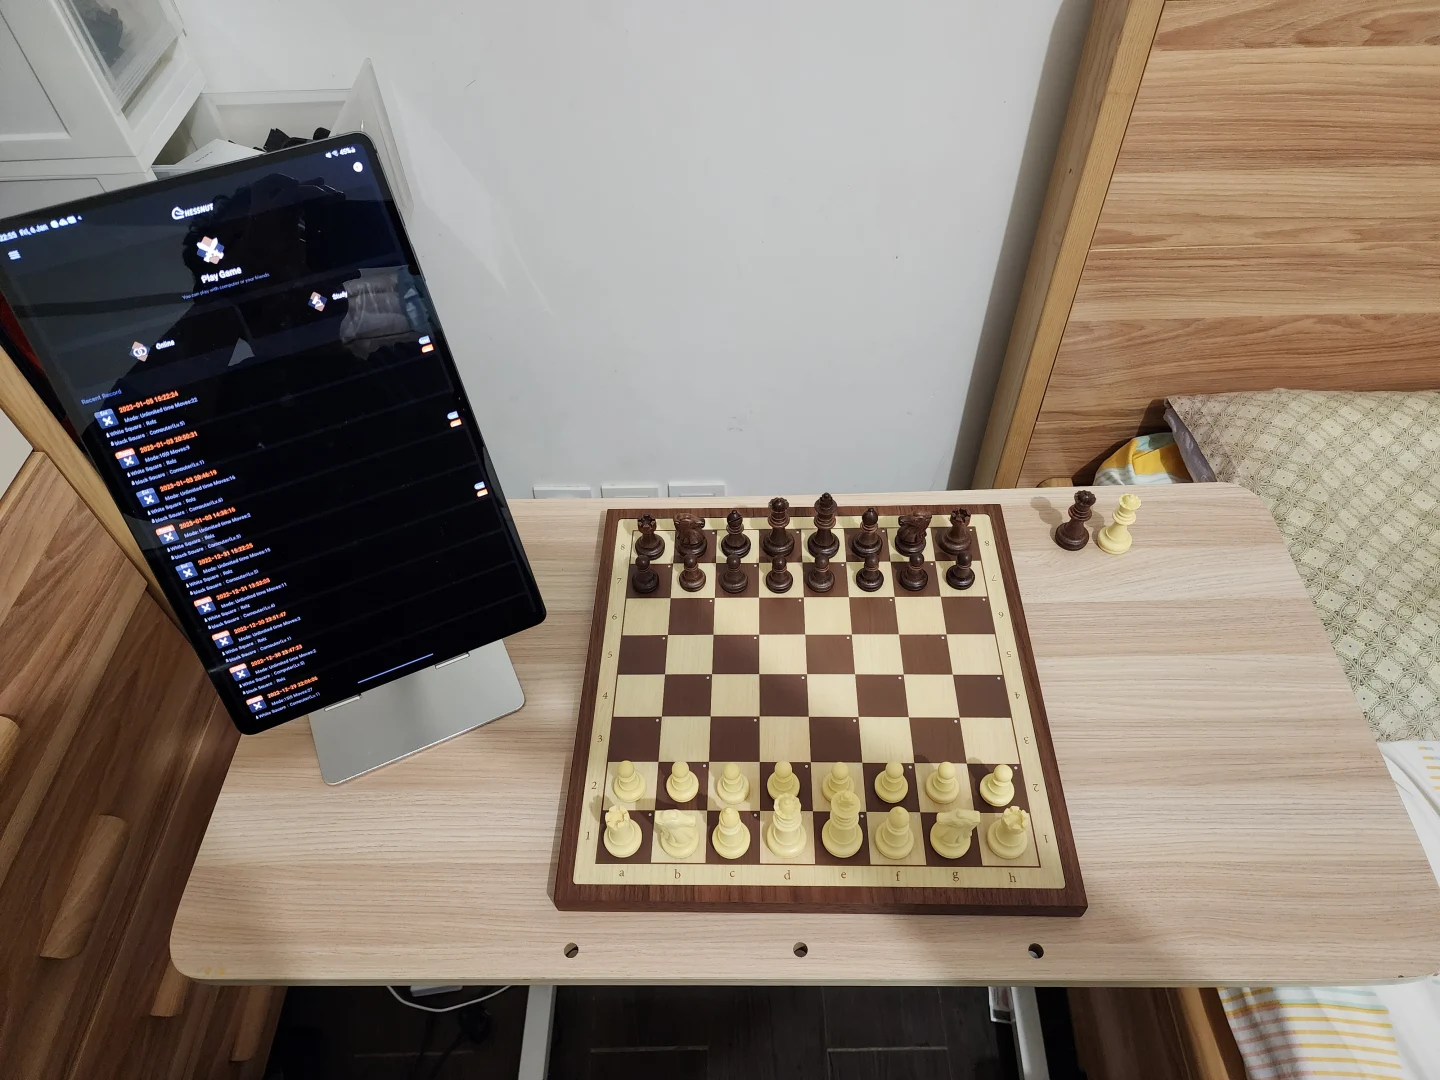  Chessnut Air Electronic Chess Set, A magnificently Handcrafted  Wooden Chess Board with Extra Queens,LEDs, AI Adaptive Electronic Chess Set  Game and App with Computer Chess Board : Toys & Games